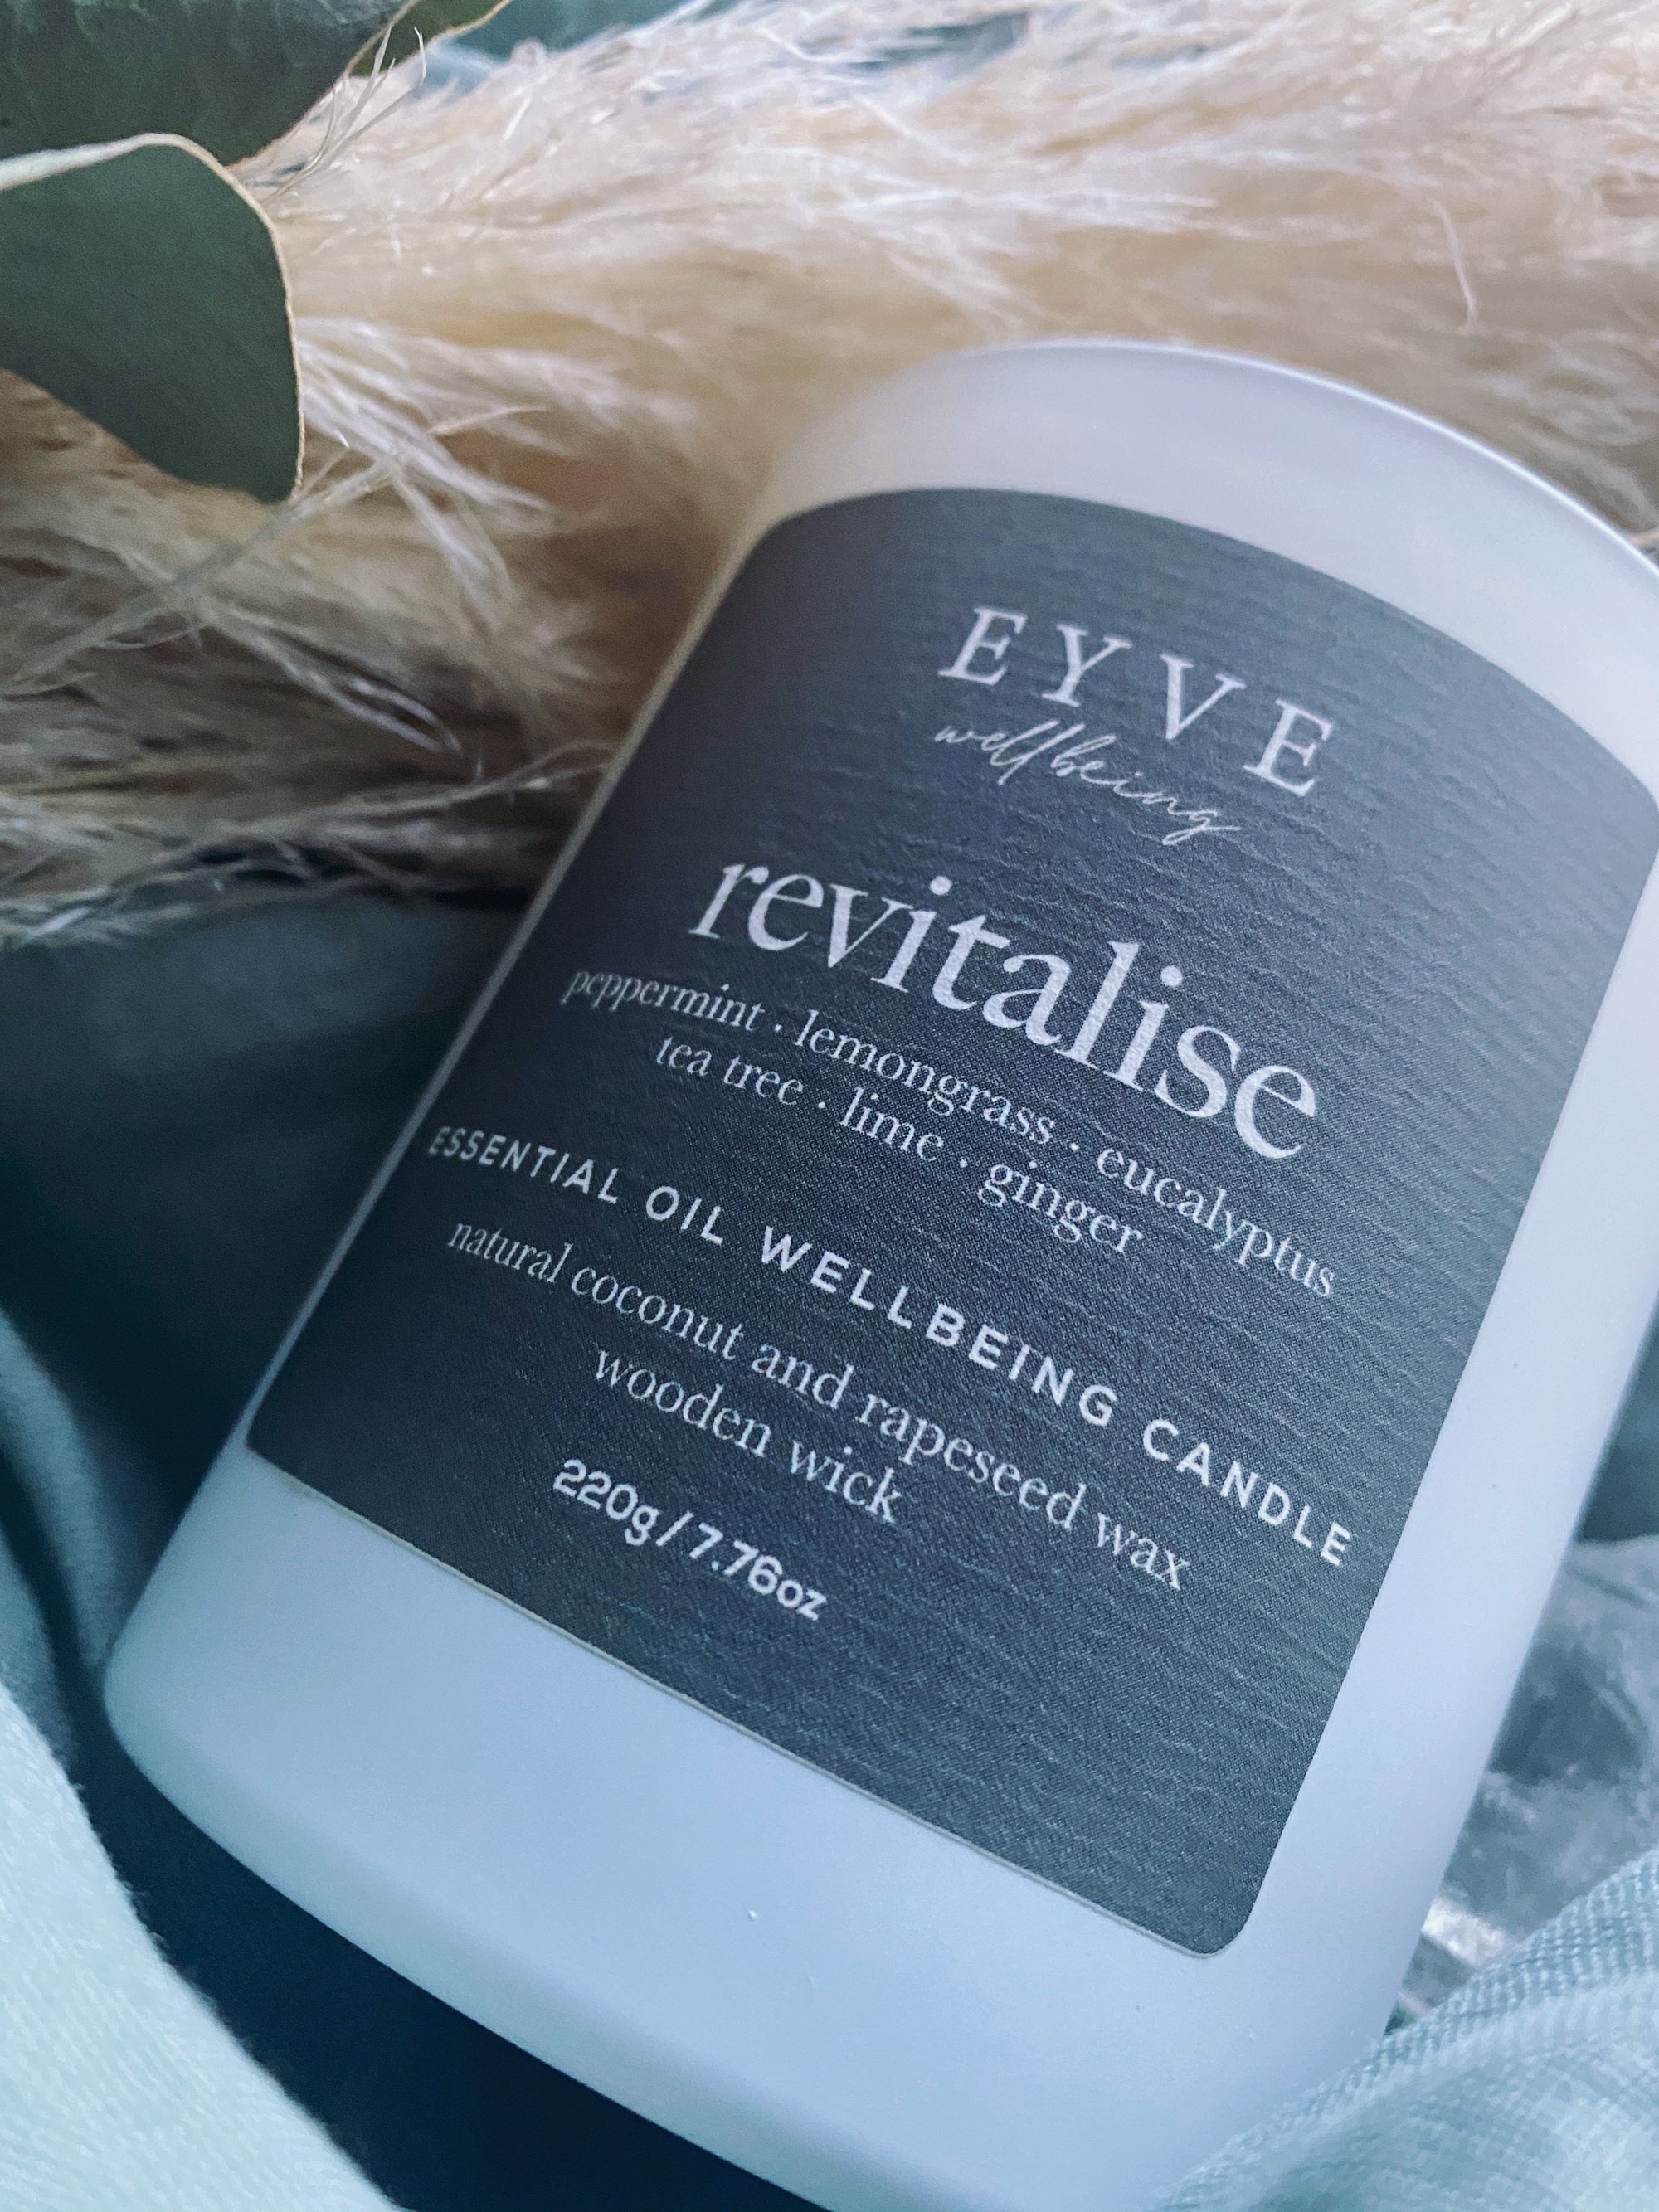 EYVE Wellbeing - Revitalise Essential Oil Wellbeing Candle